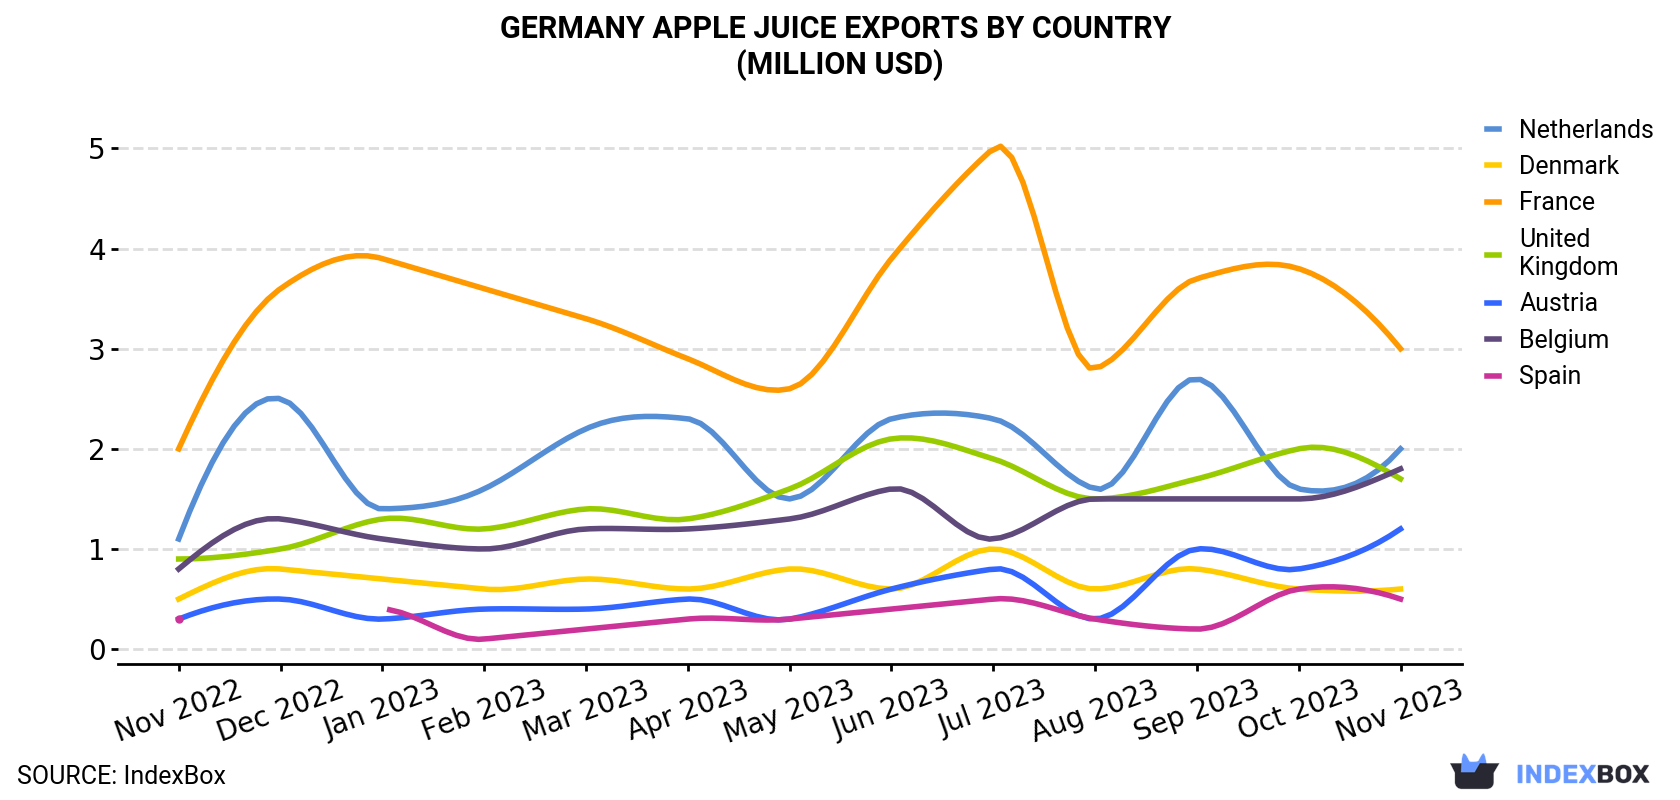 Germany Apple Juice Exports By Country (Million USD)